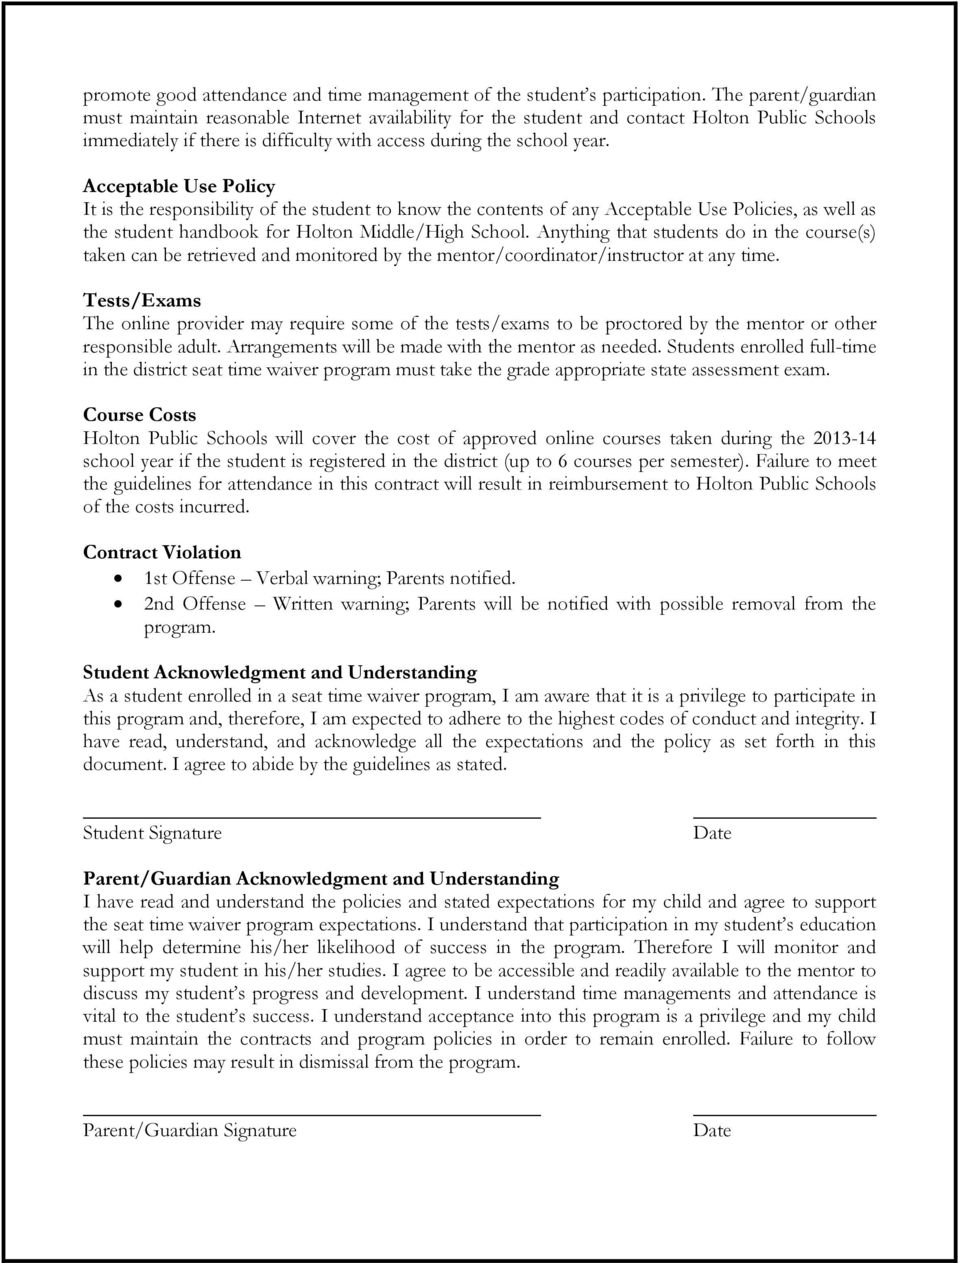 Acceptable Use Policy It is the responsibility of the student to know the contents of any Acceptable Use Policies, as well as the student handbook for Holton Middle/High School.